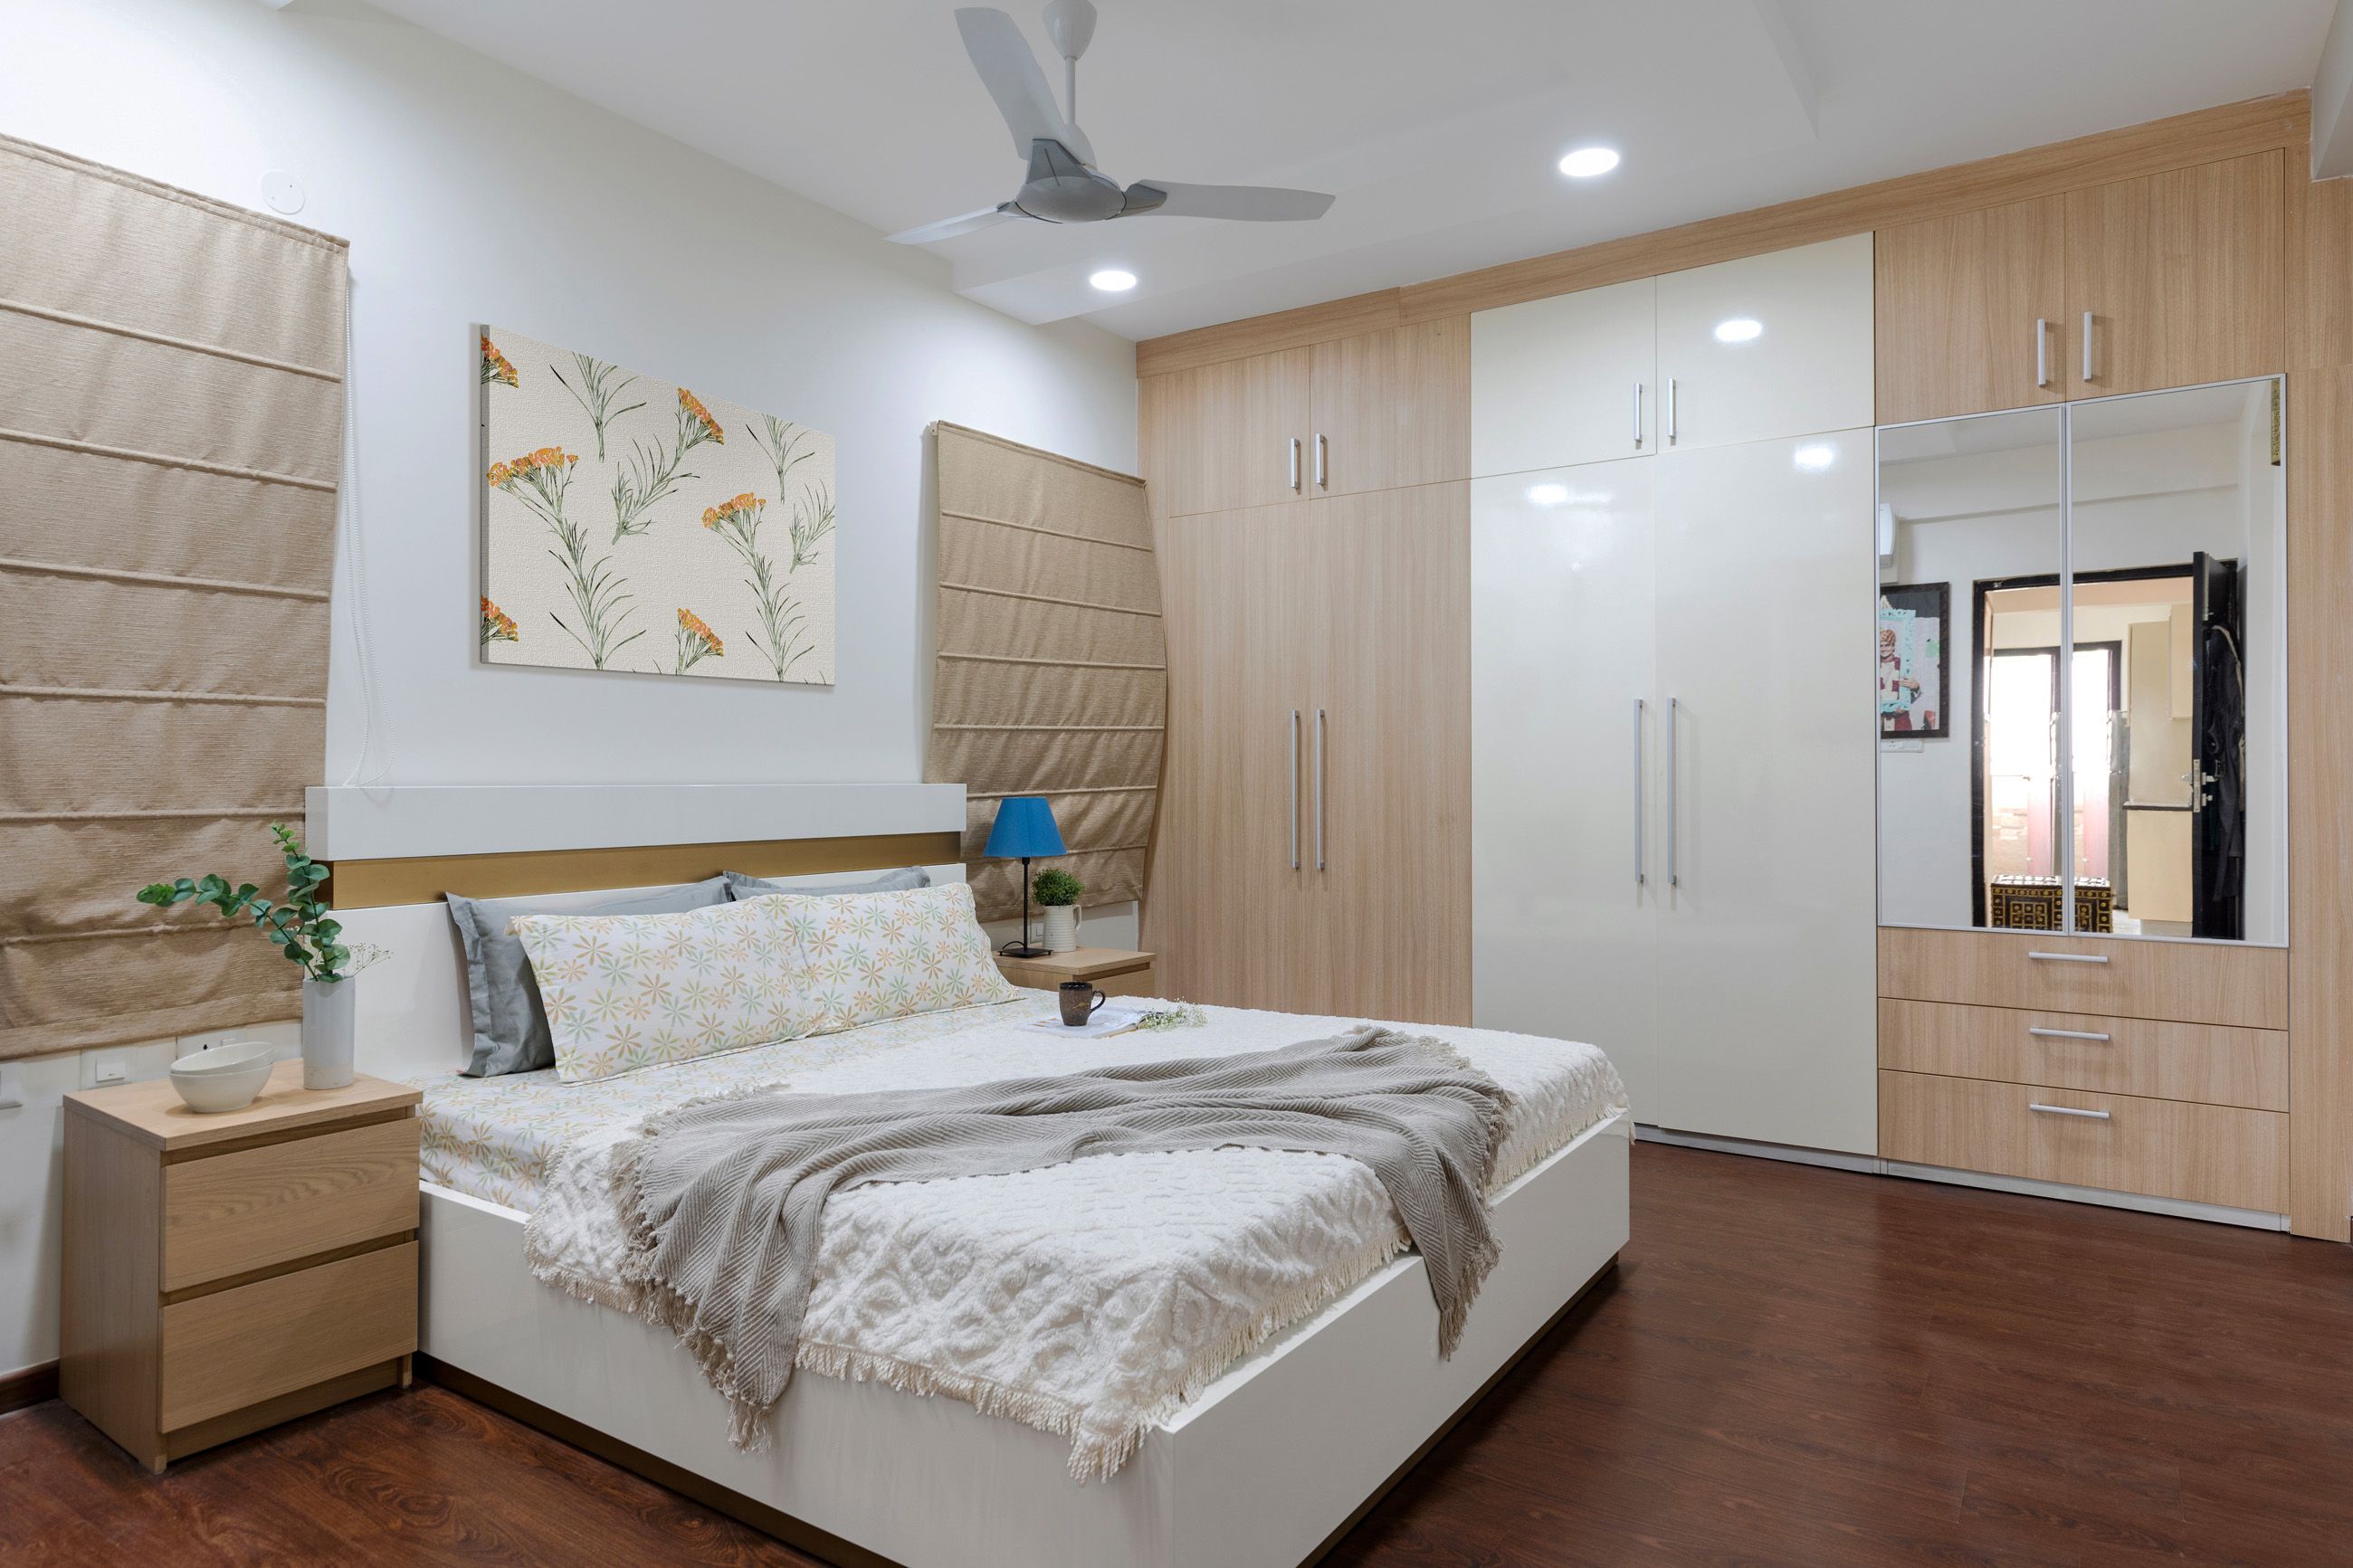 Contemporary Guest Room Design With 6-Door Wood And White Swing Wardrobe